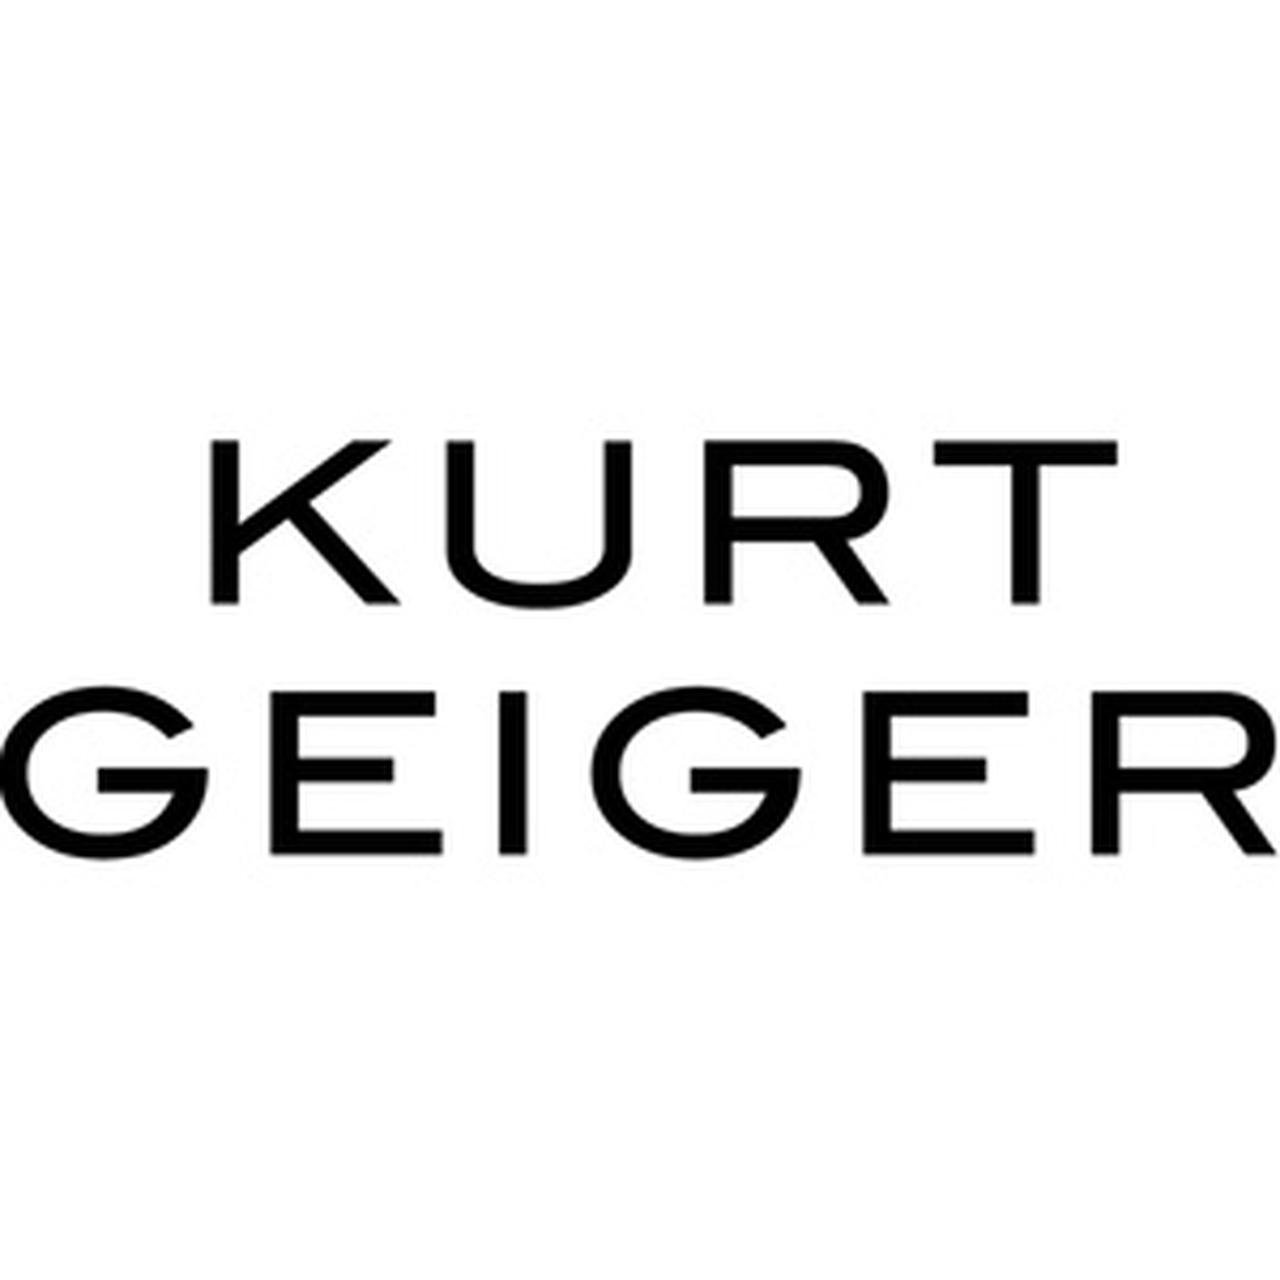 Look out for my new Kurt Geiger shoes and bags... - Depop